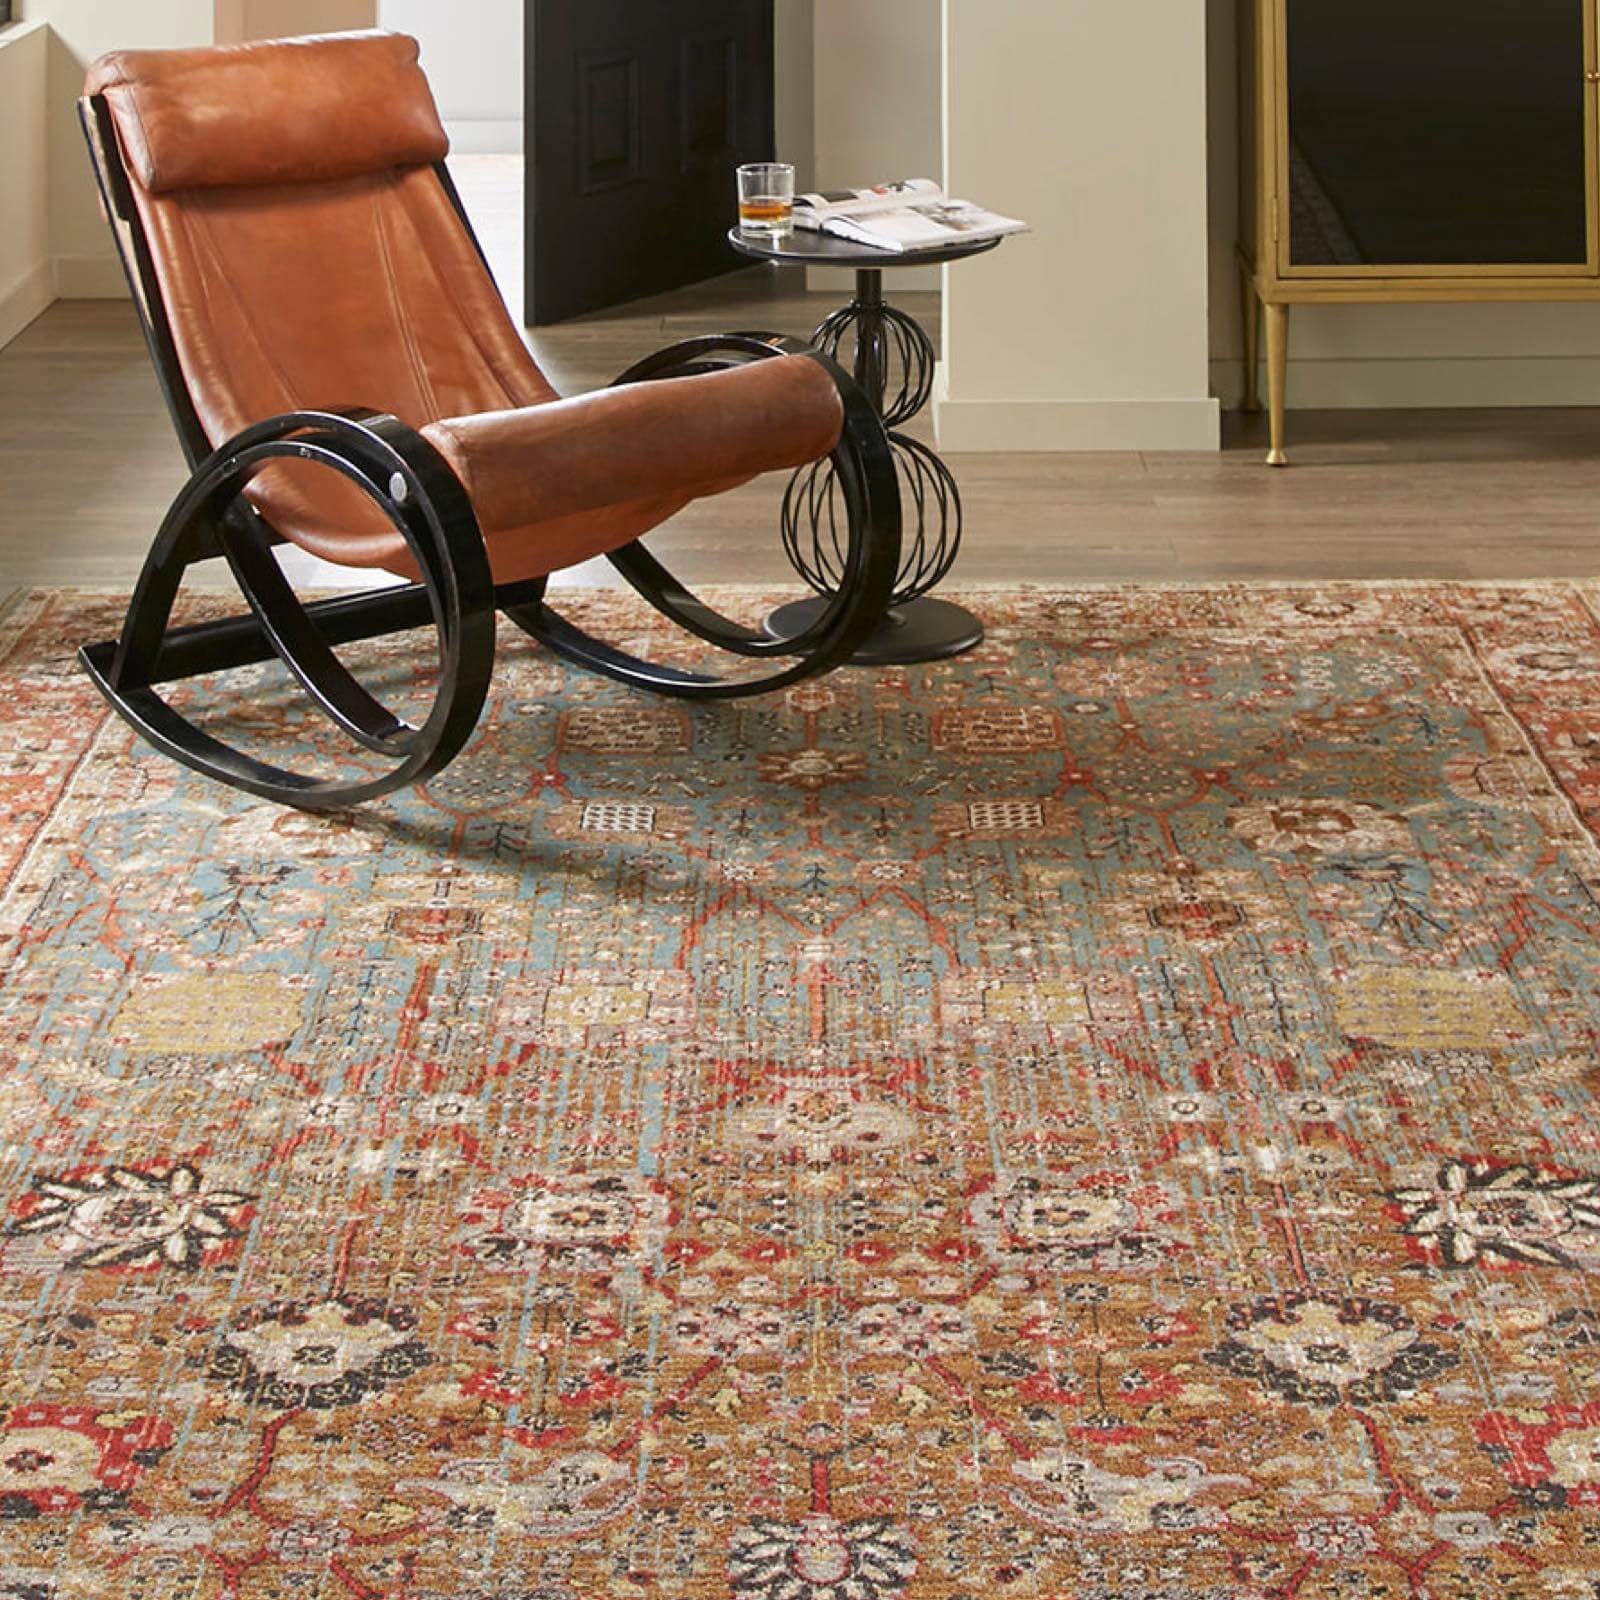 Area rug in living room | Big Bob's Flooring Outlet Ohio